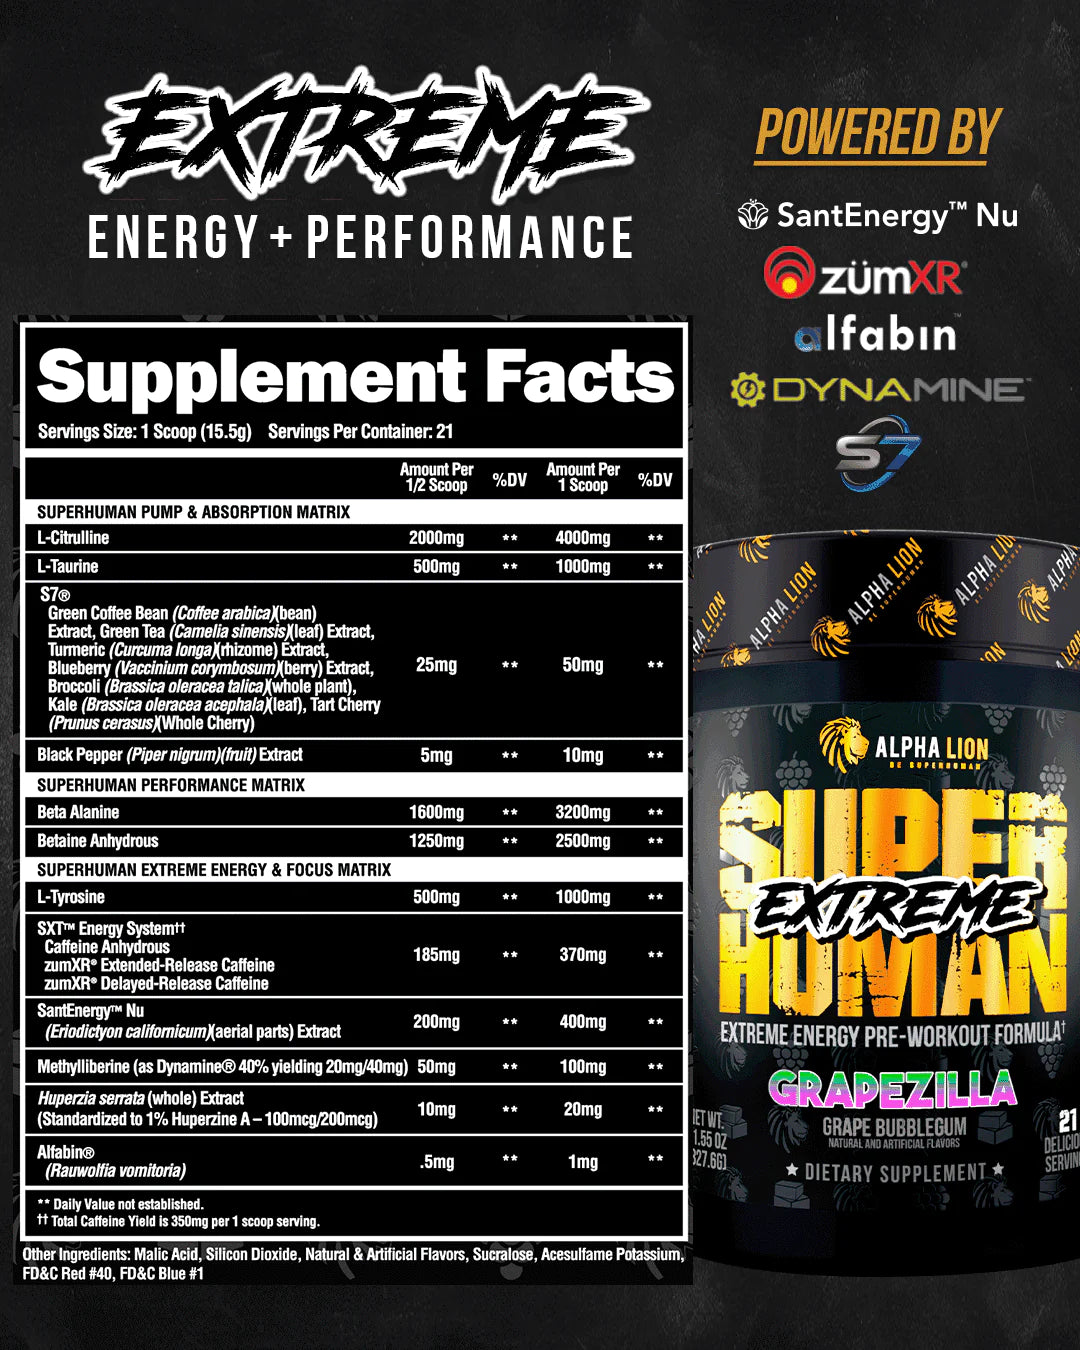 Superhuman Extreme PreWorkout Product Supplement Facts Image